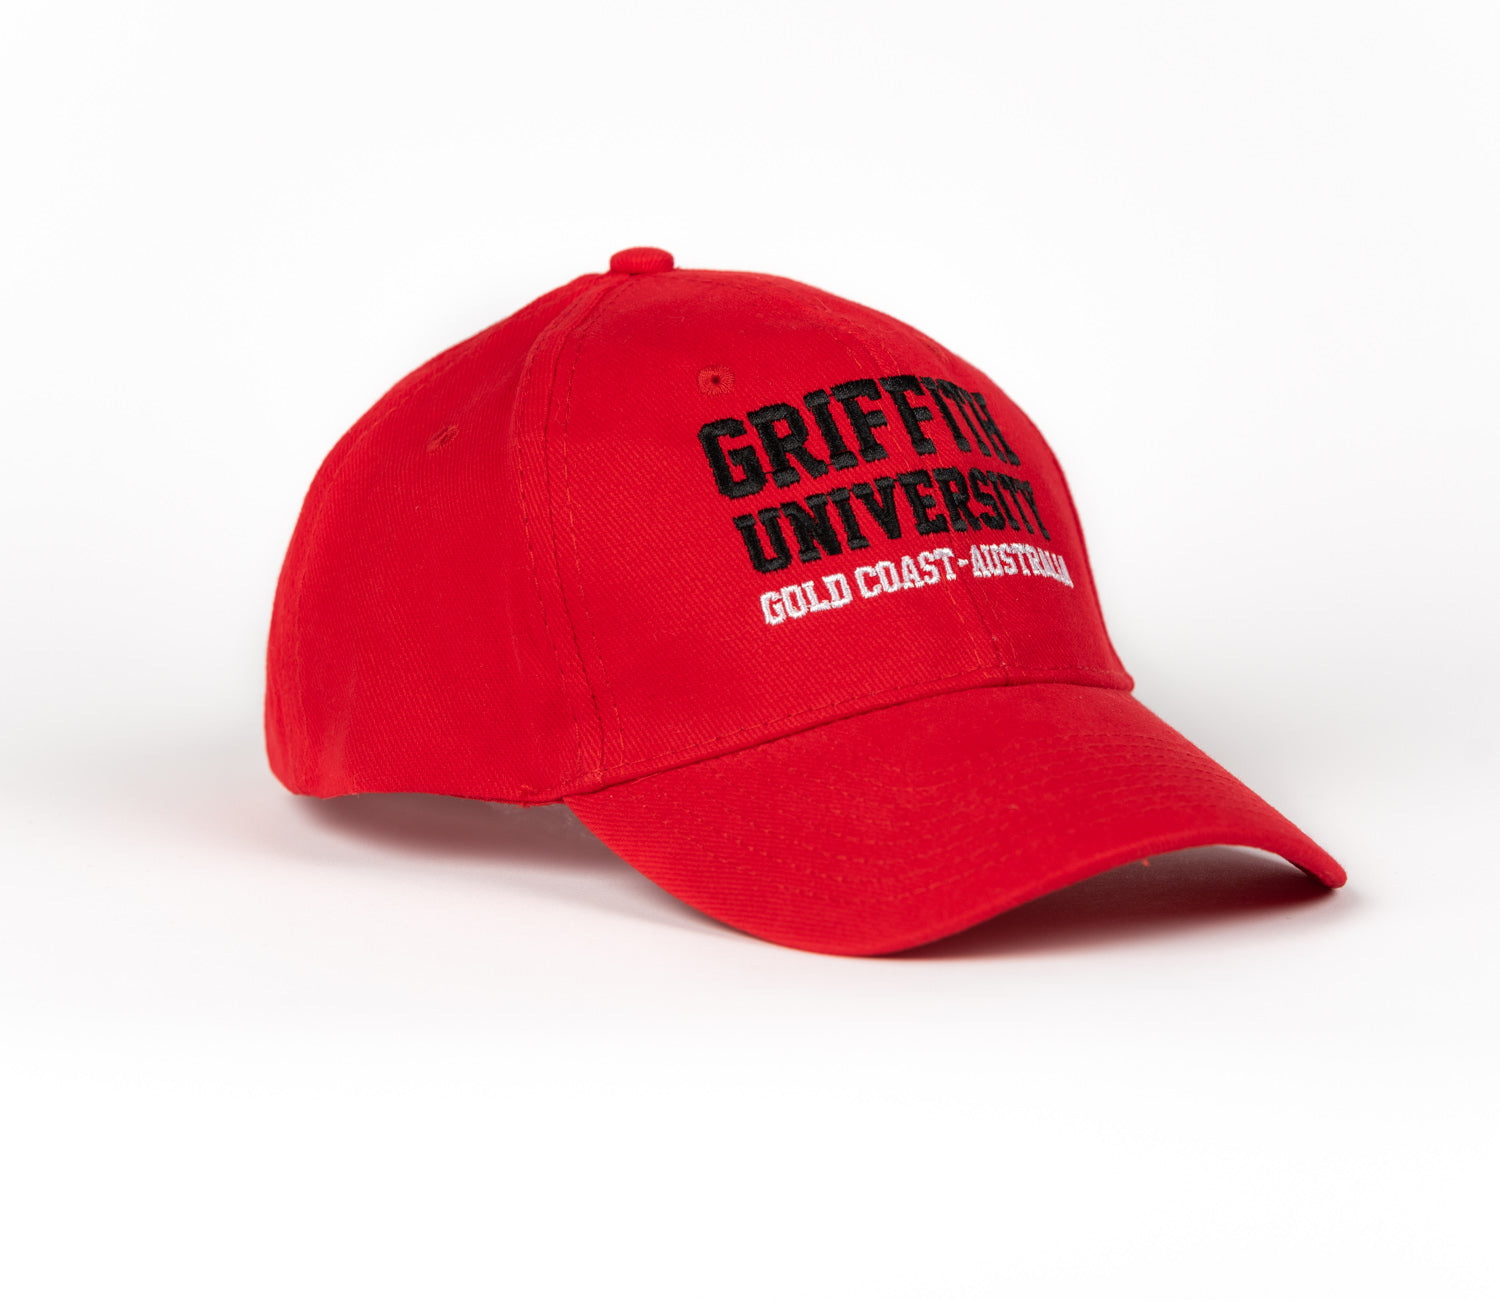 Griffith embroidered cap